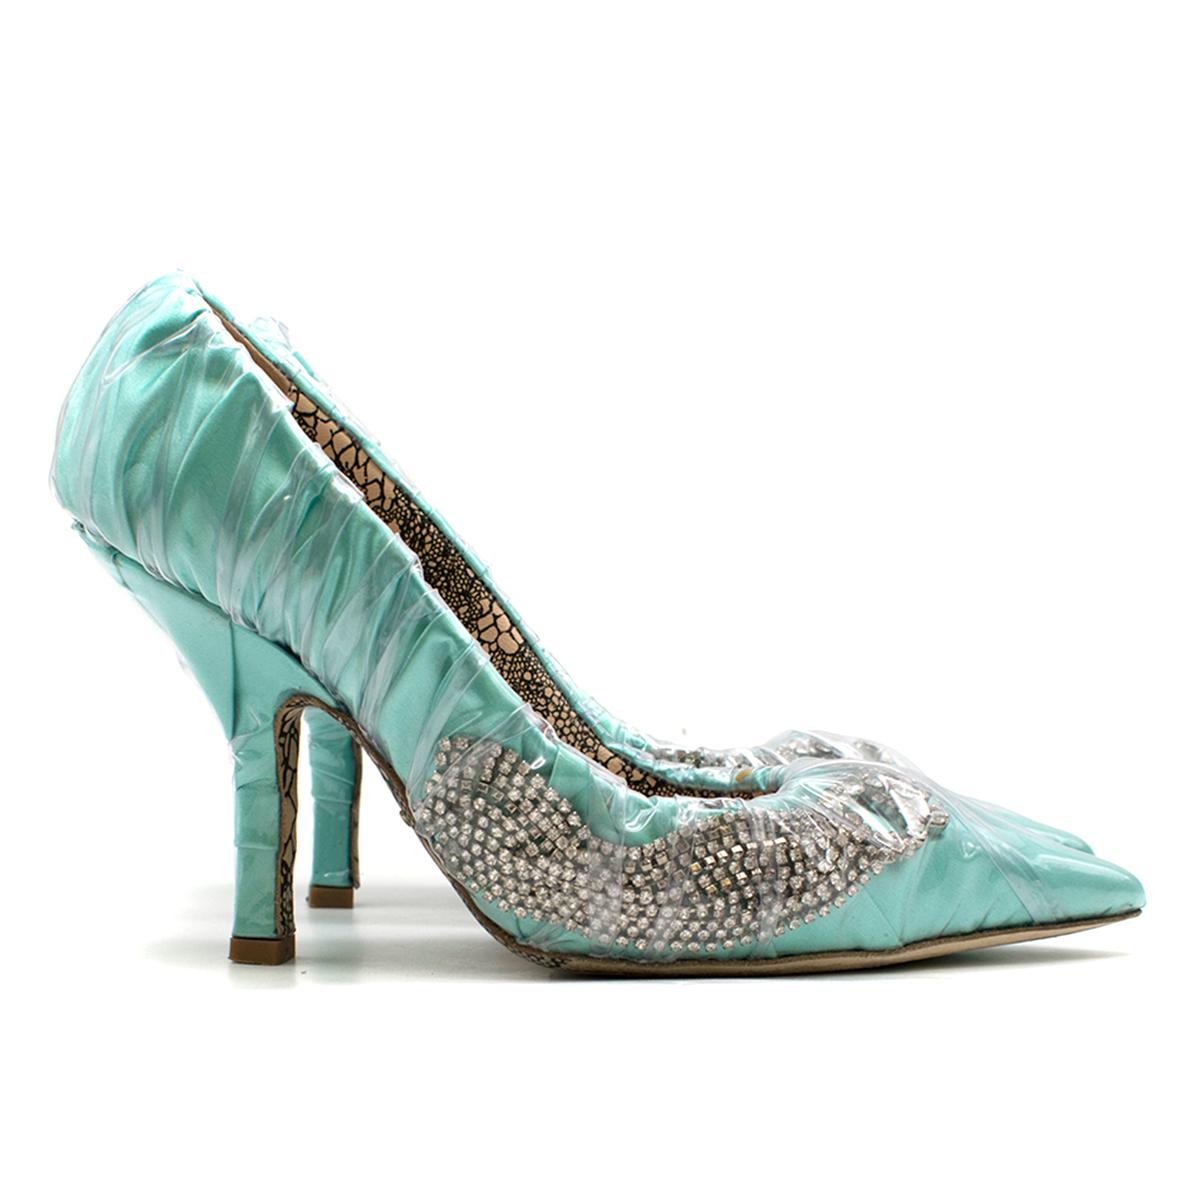 Paciotti By Midnight Crystal-embellished Ruched Satin & PVC Pump

- Turquoise ruched satin pump
- Wrapped in ruched PVC
- Front crystal embellished
- Pointe toe
- 90mm stiletto heel
- Nude leather lining with logo embroidered
- This item comes with